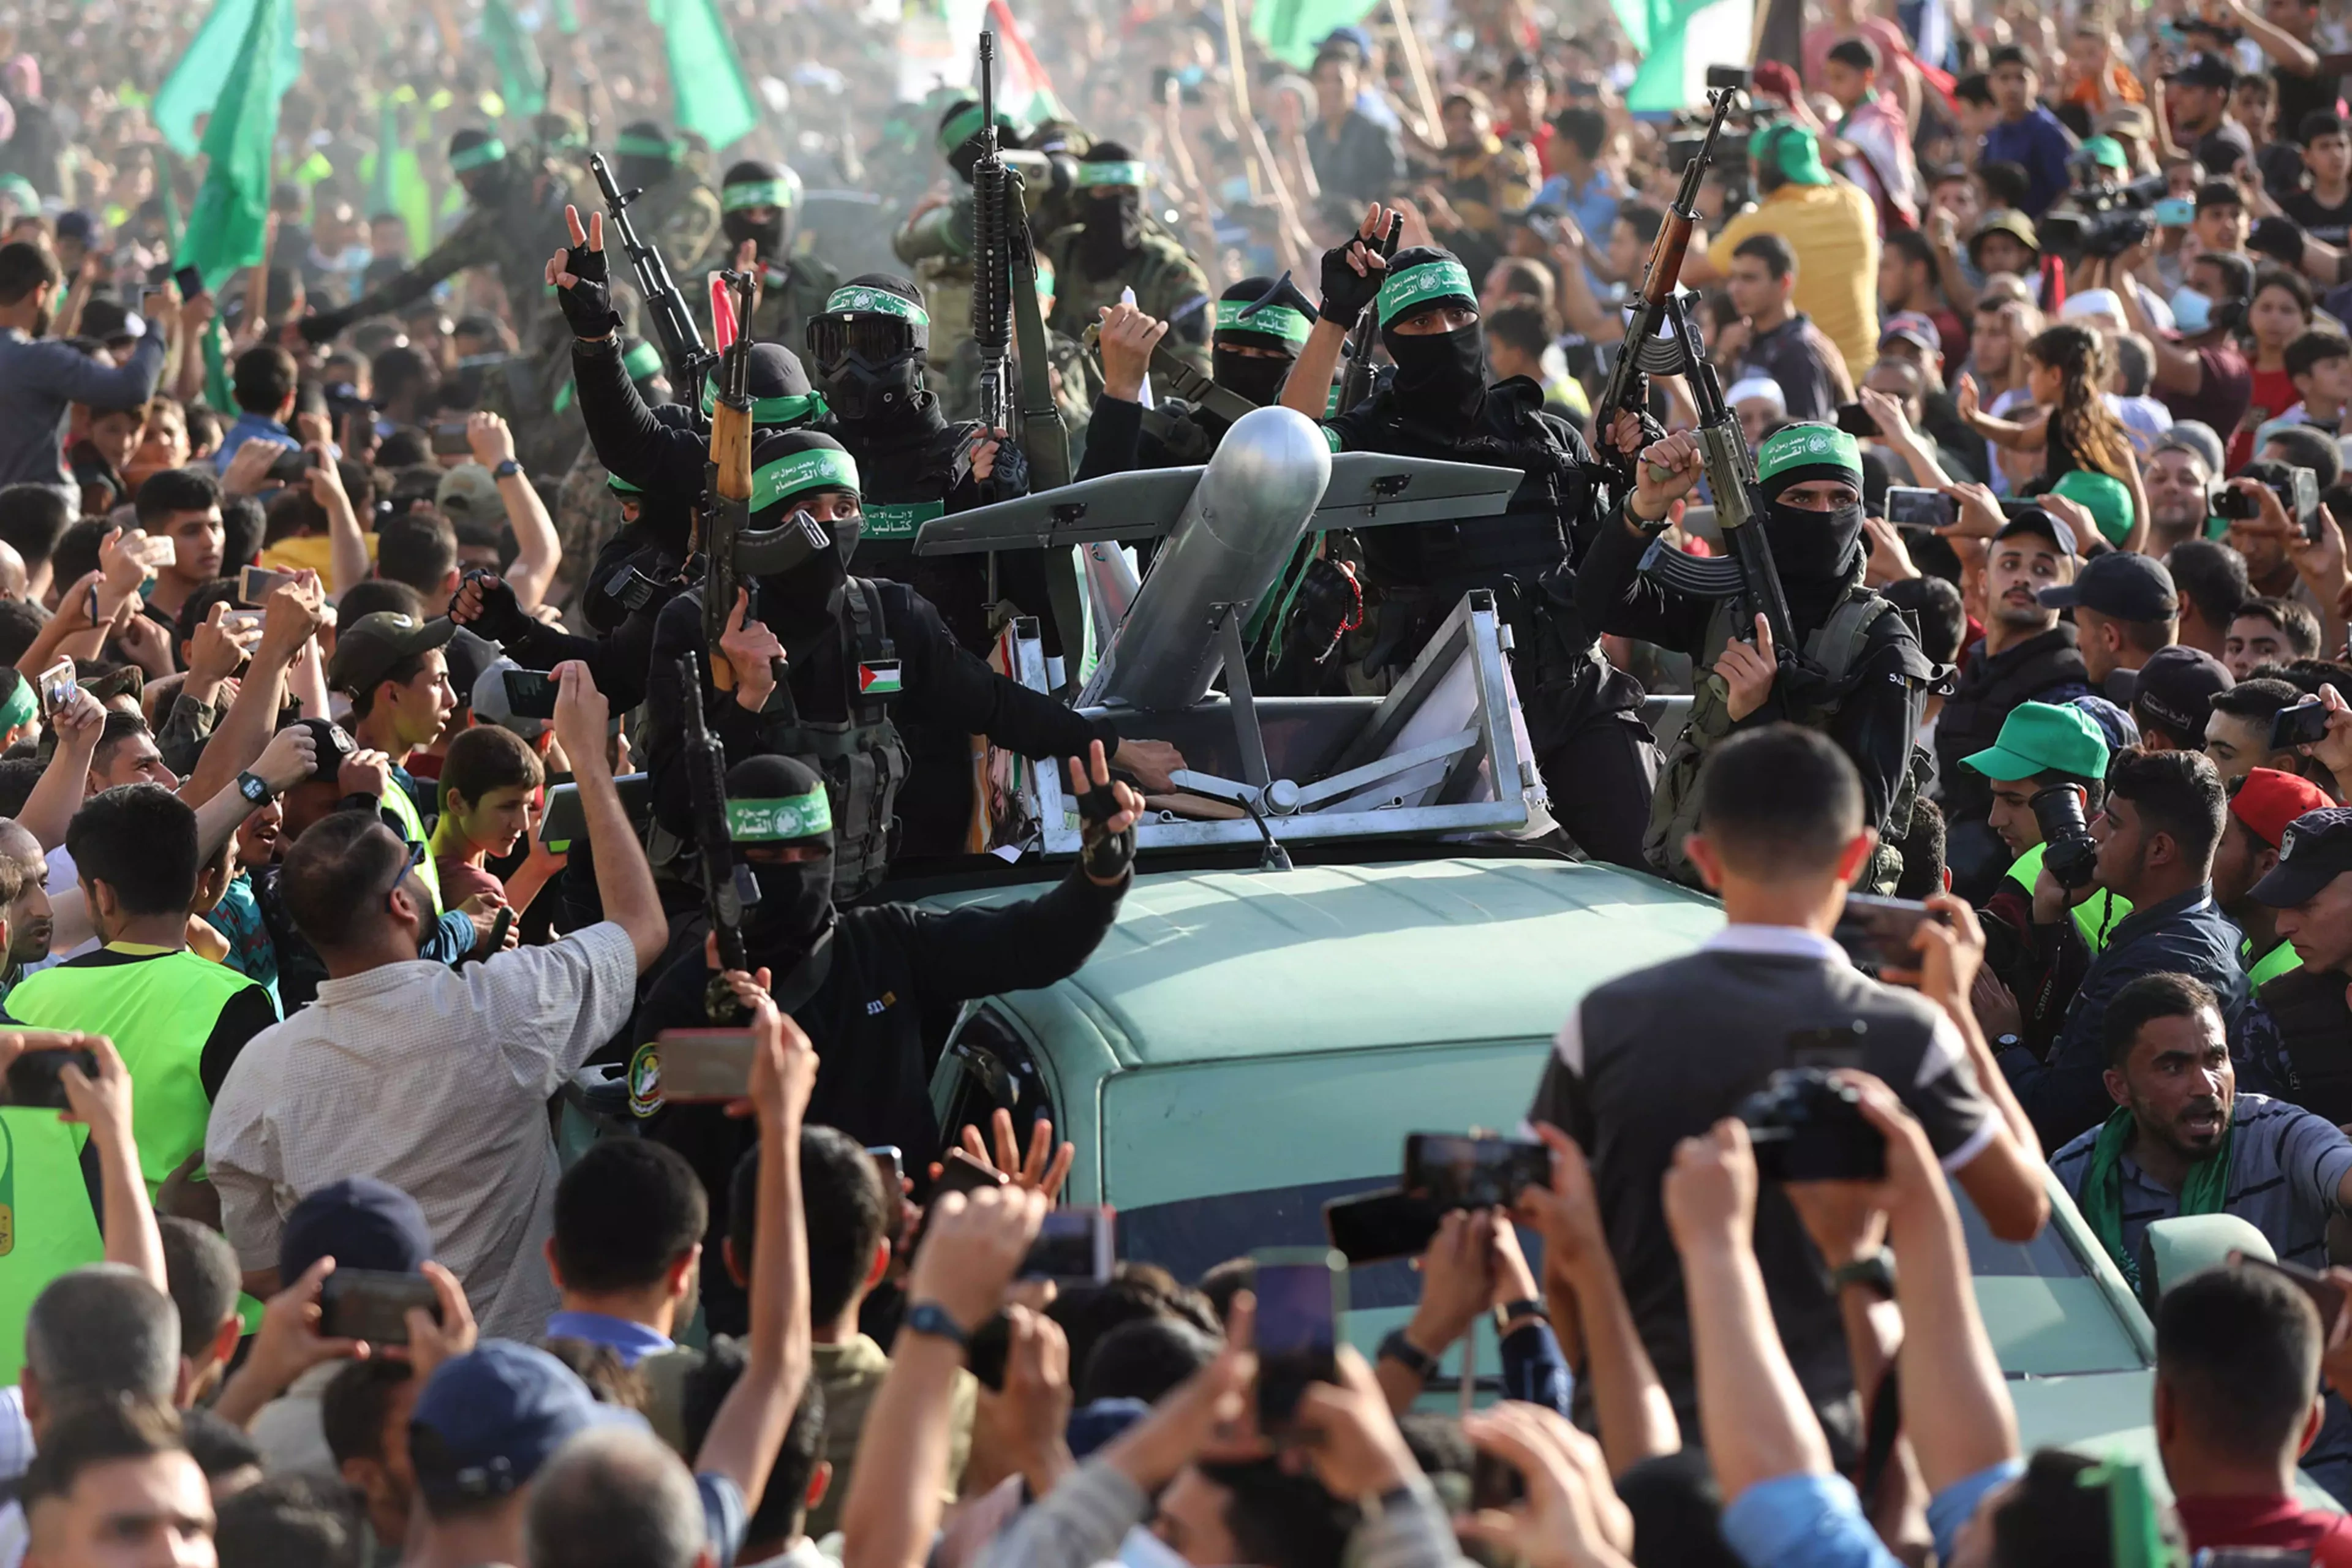 A parade for the Izz ad-Din al-Qassam Brigades, Hamas’s militant arm, is held in Gaza.